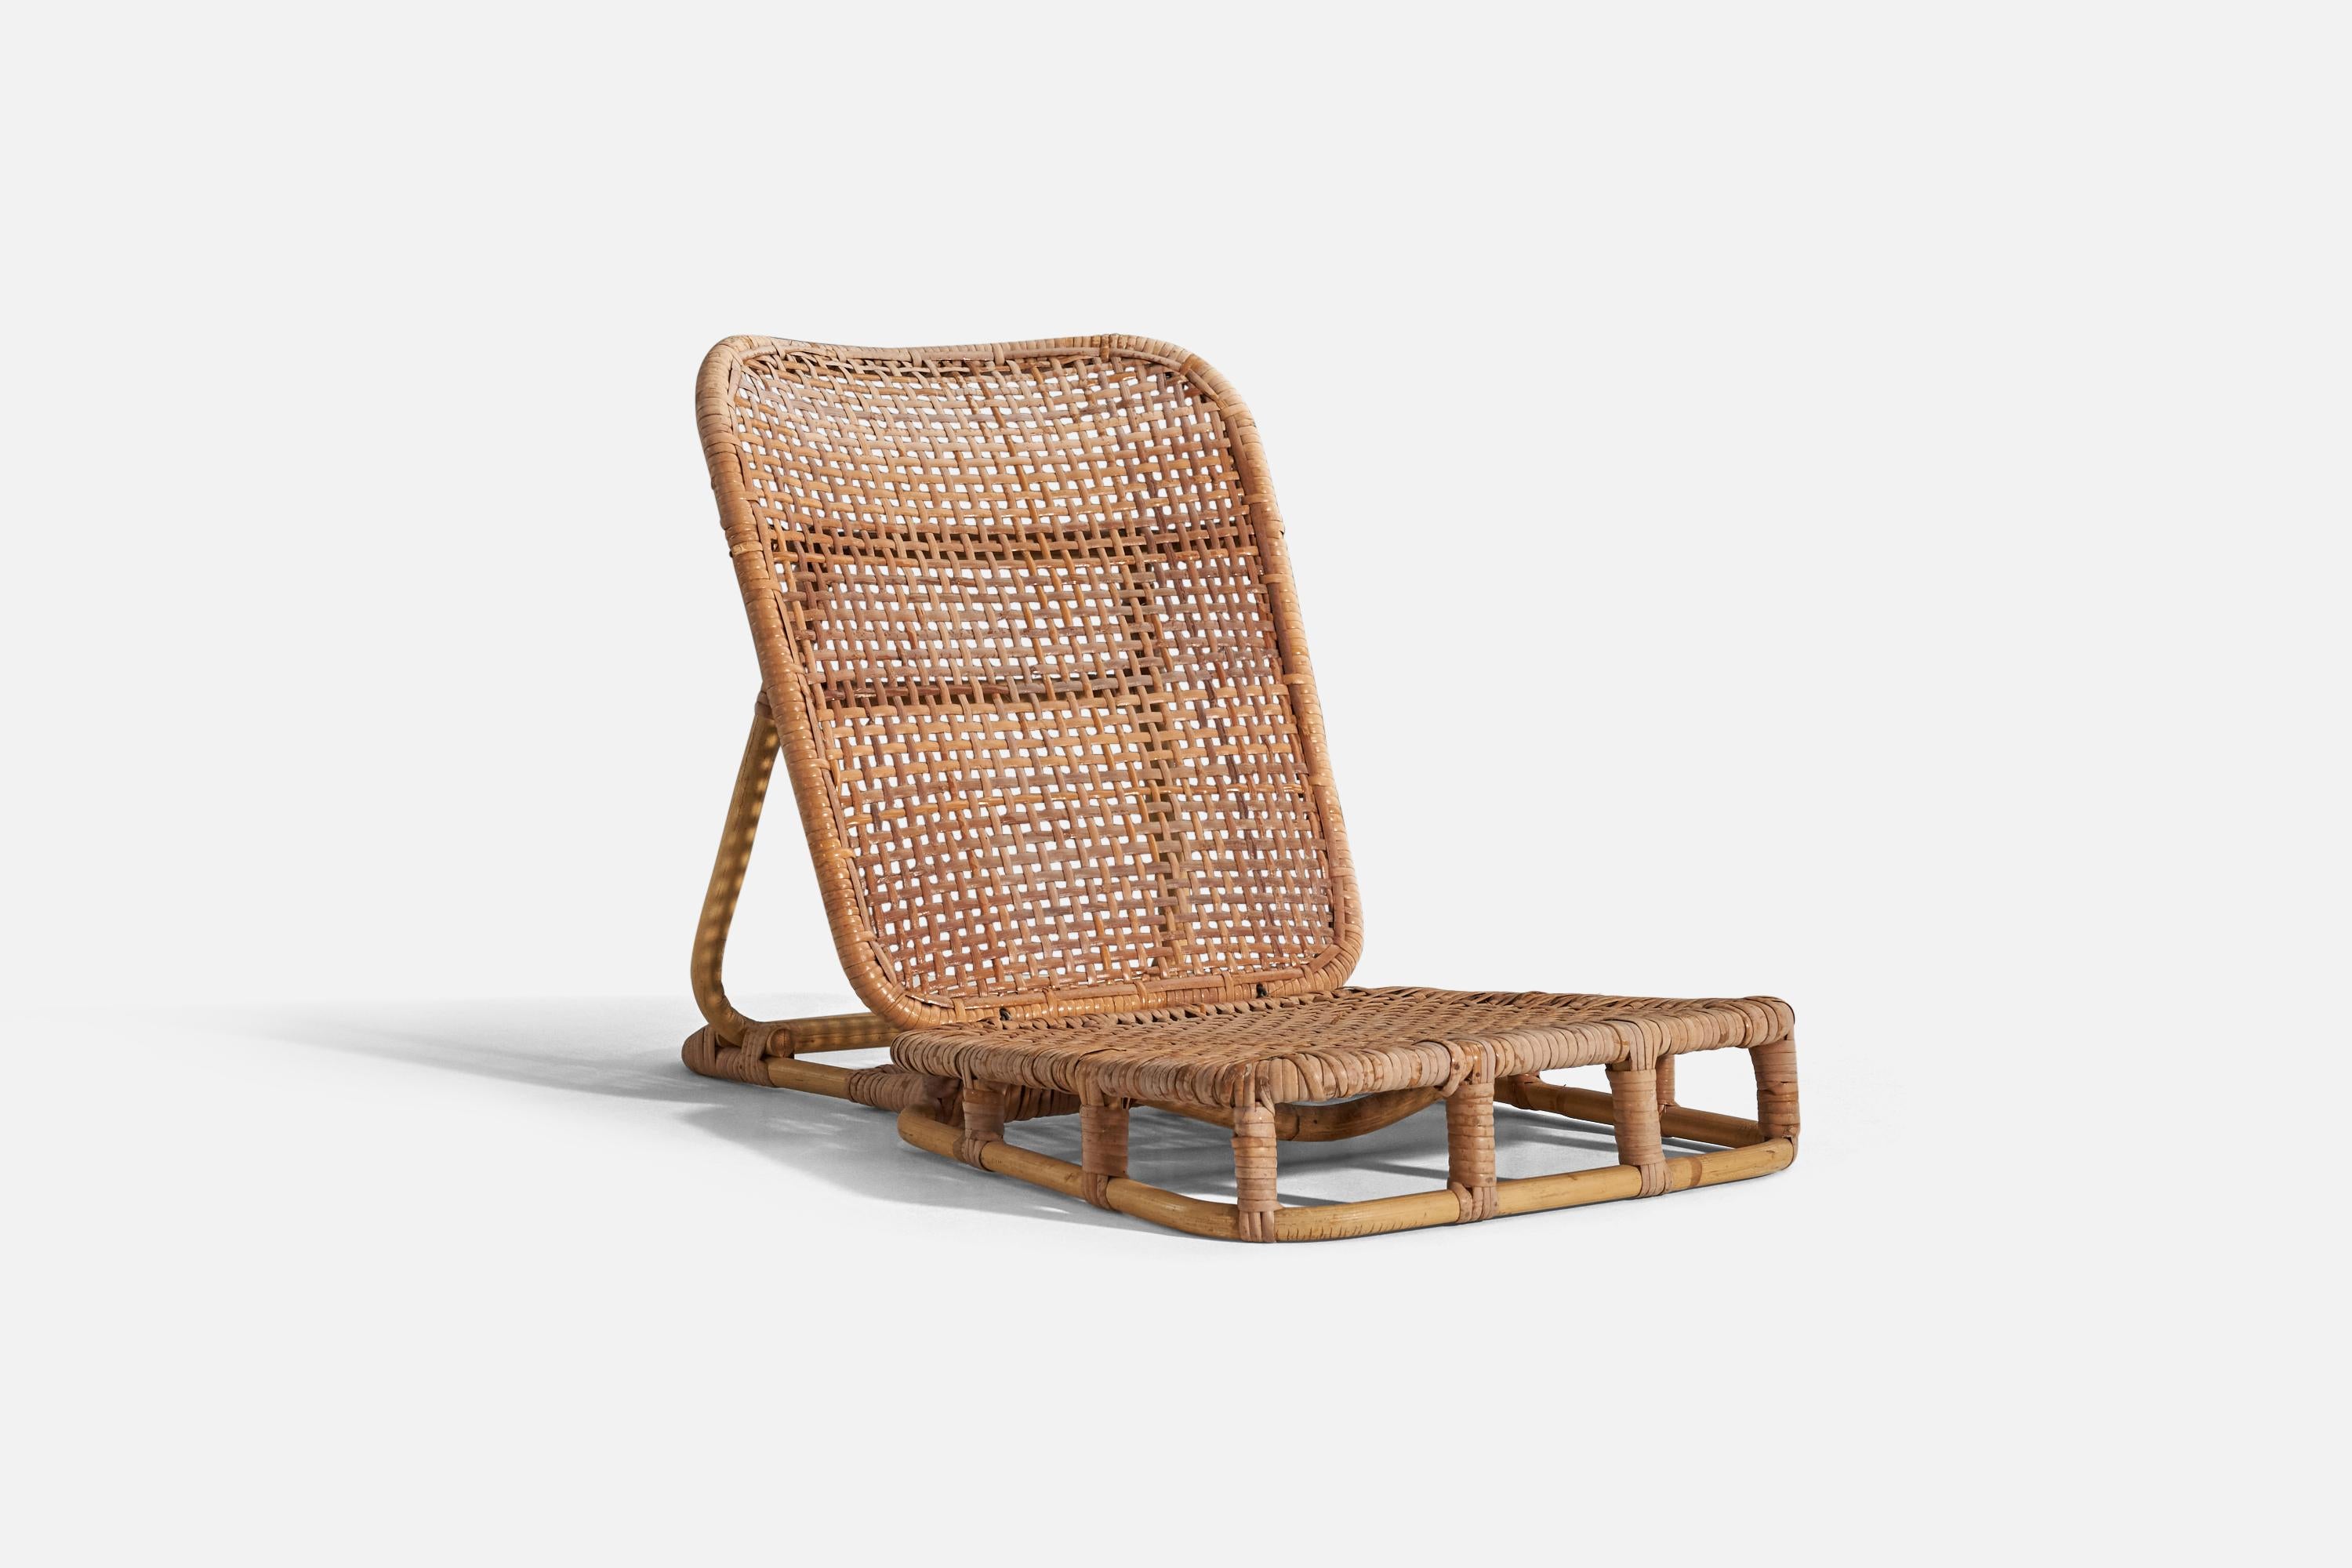 A foldable rattan chair designed and produced by Calif-Asia, USA, c. 1960s.